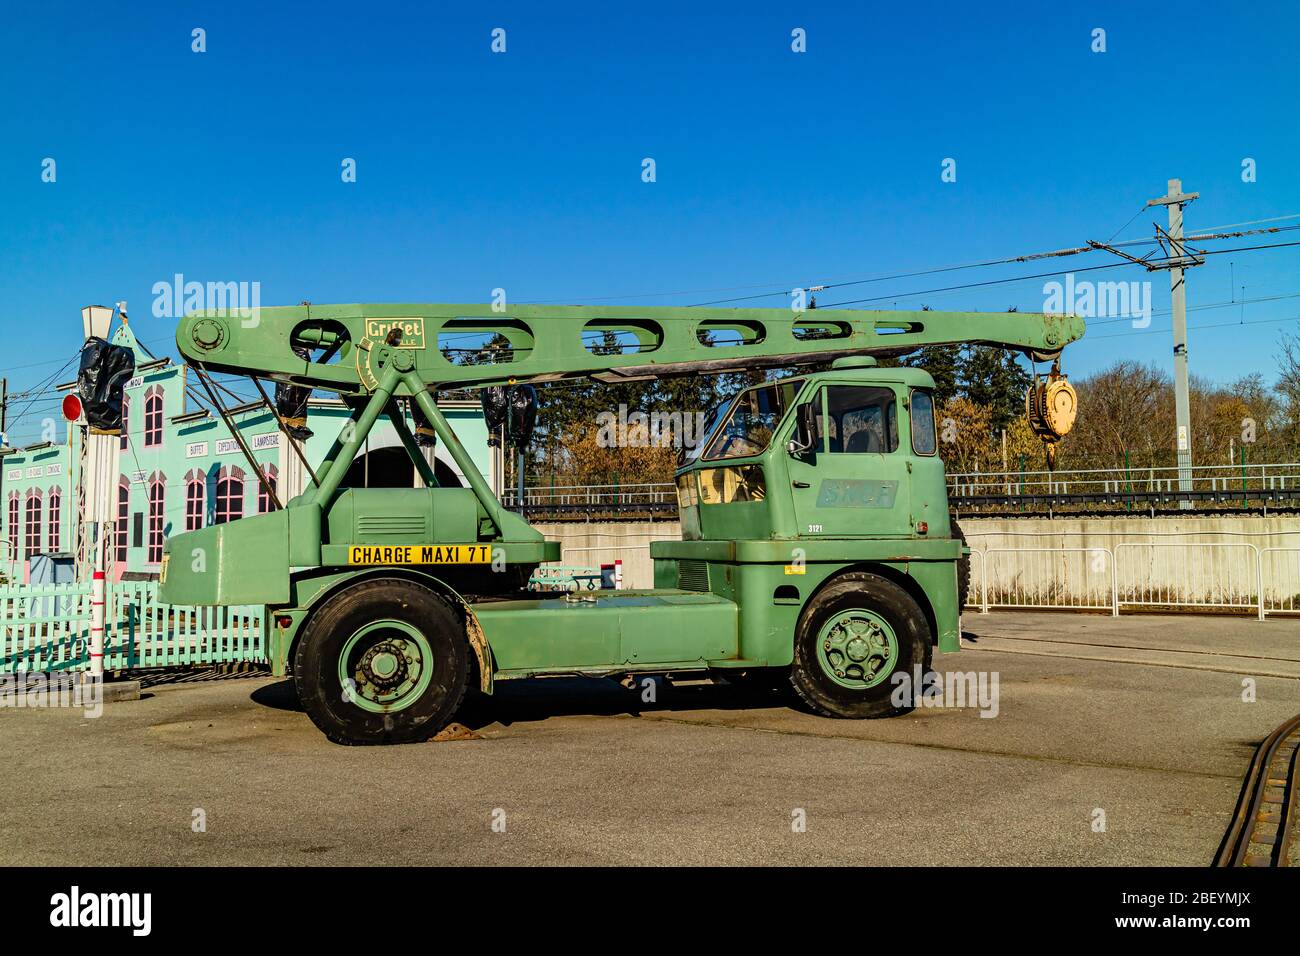 A vintage truck, now on display in the Cité du Train railway museum in Mulhouse, France. February 2020. Stock Photo